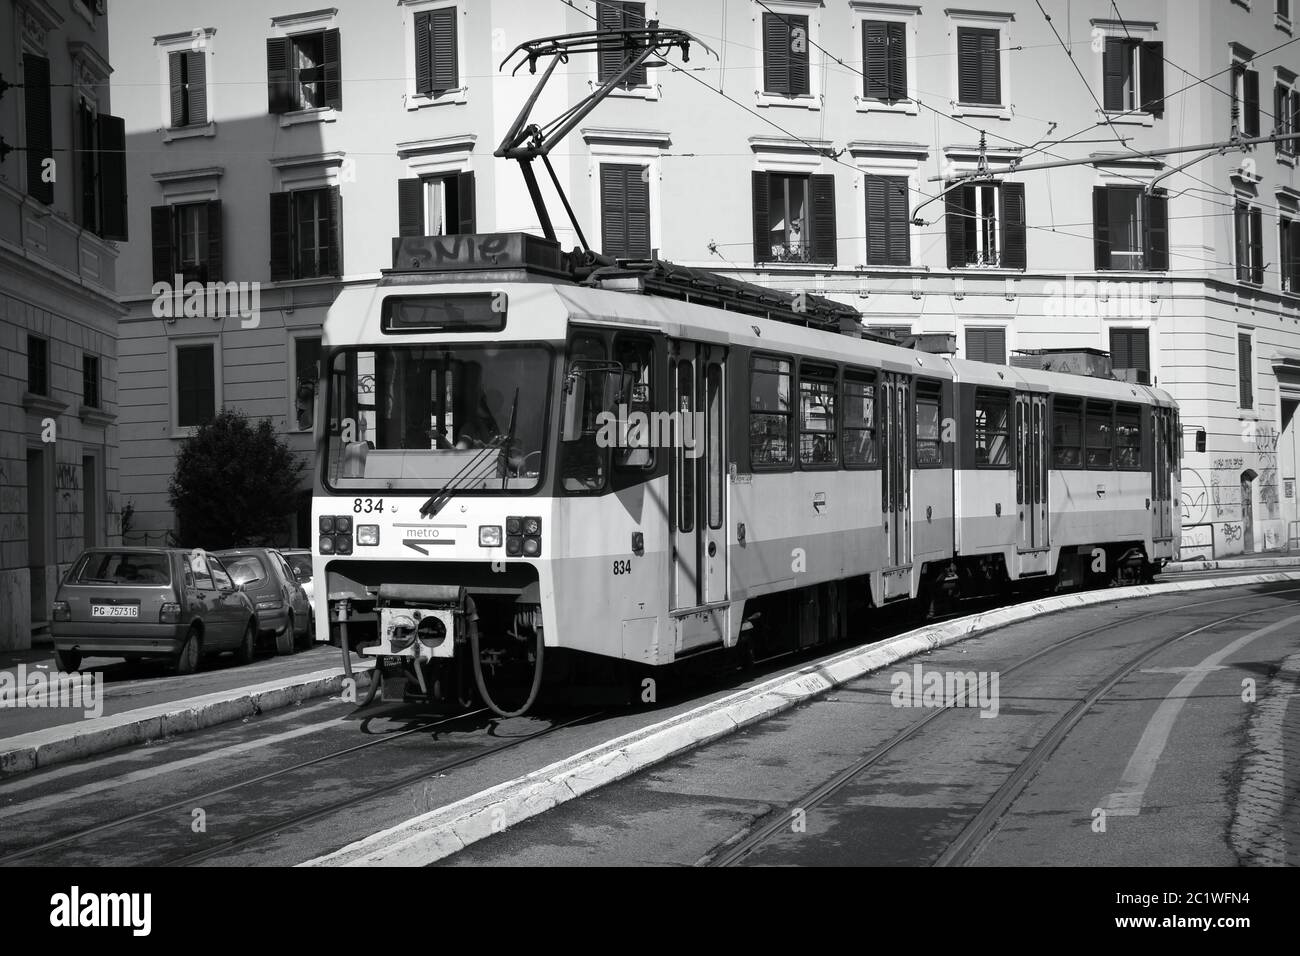 ROME, ITALY - MAY 12, 2010: Tram in Rome, Italy. The tram (officially railway) is operated by Rome Metro, which has an annual ridership of 331 million Stock Photo